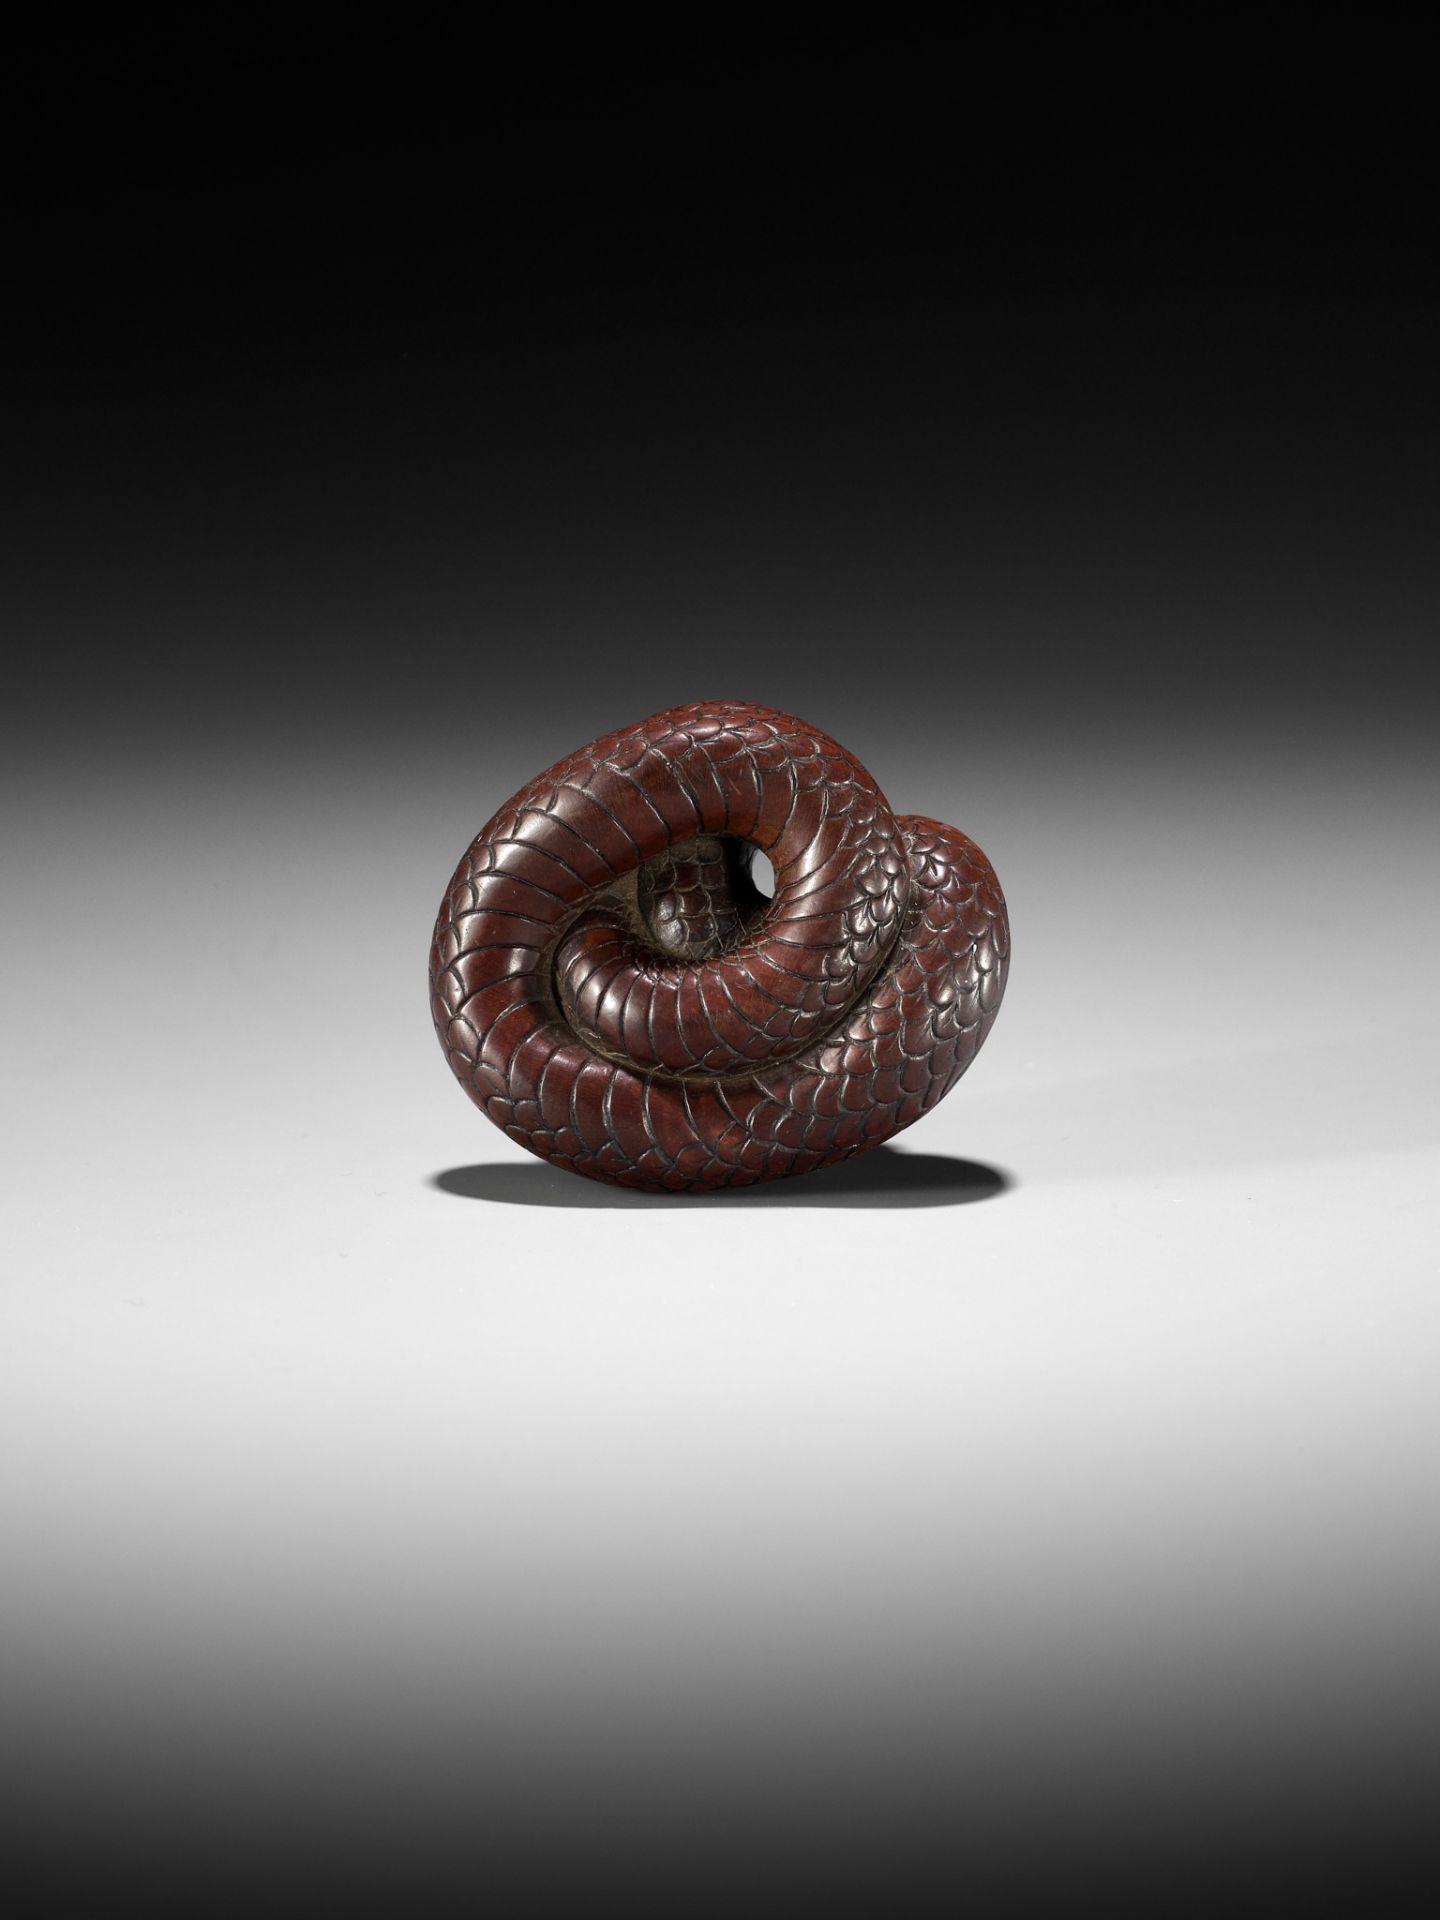 AN EXCEPTIONAL AND LARGE WOOD NETSUKE OF A SNAKE, ATTRIBUTED TO OKATOMO - Image 6 of 19